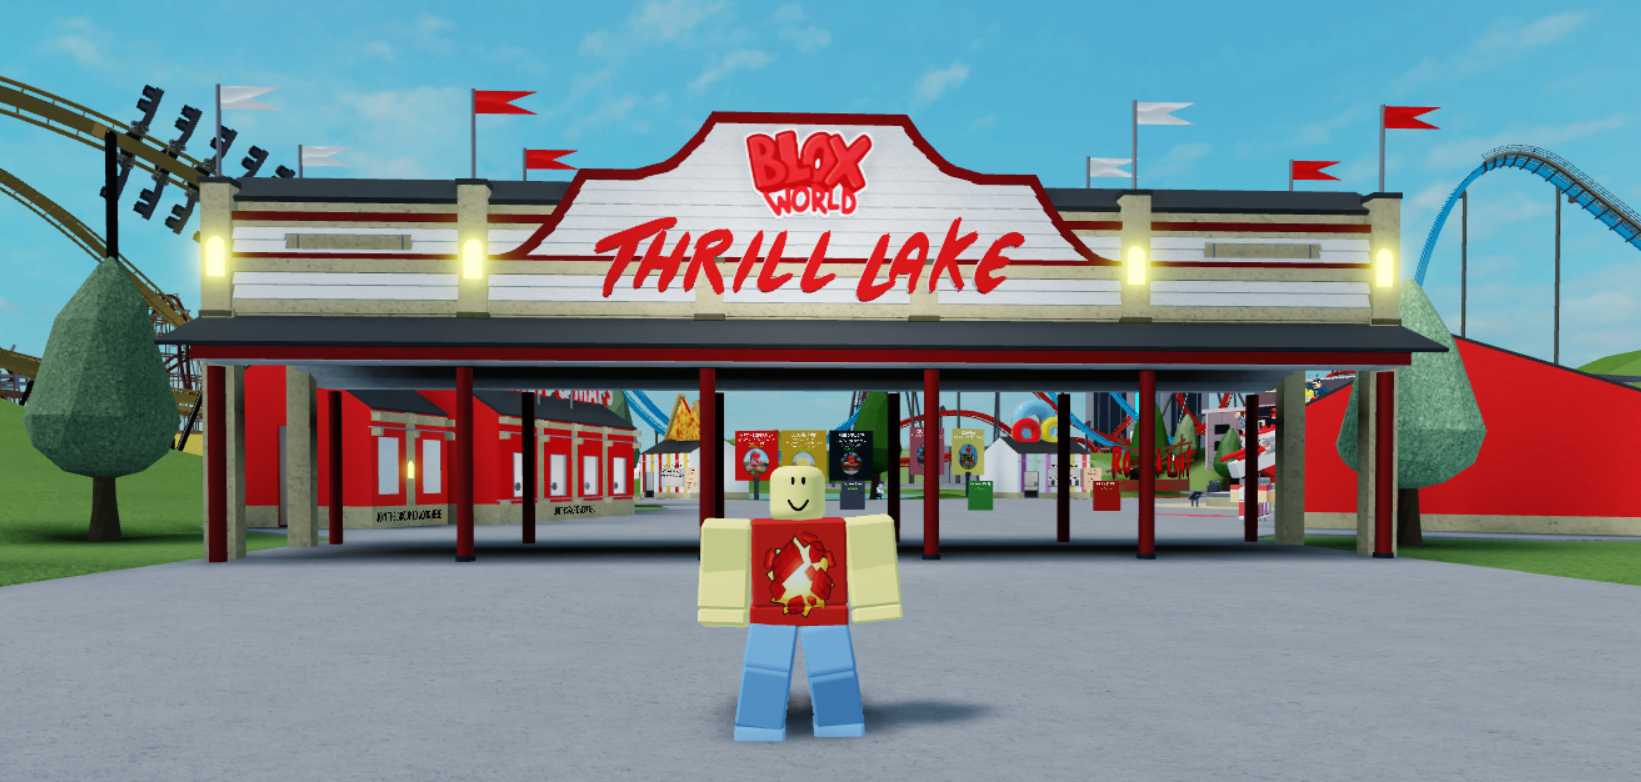 A Ride Theme Park Blox World Woodreviewerrbx - theme park tycoon roblox get on ride